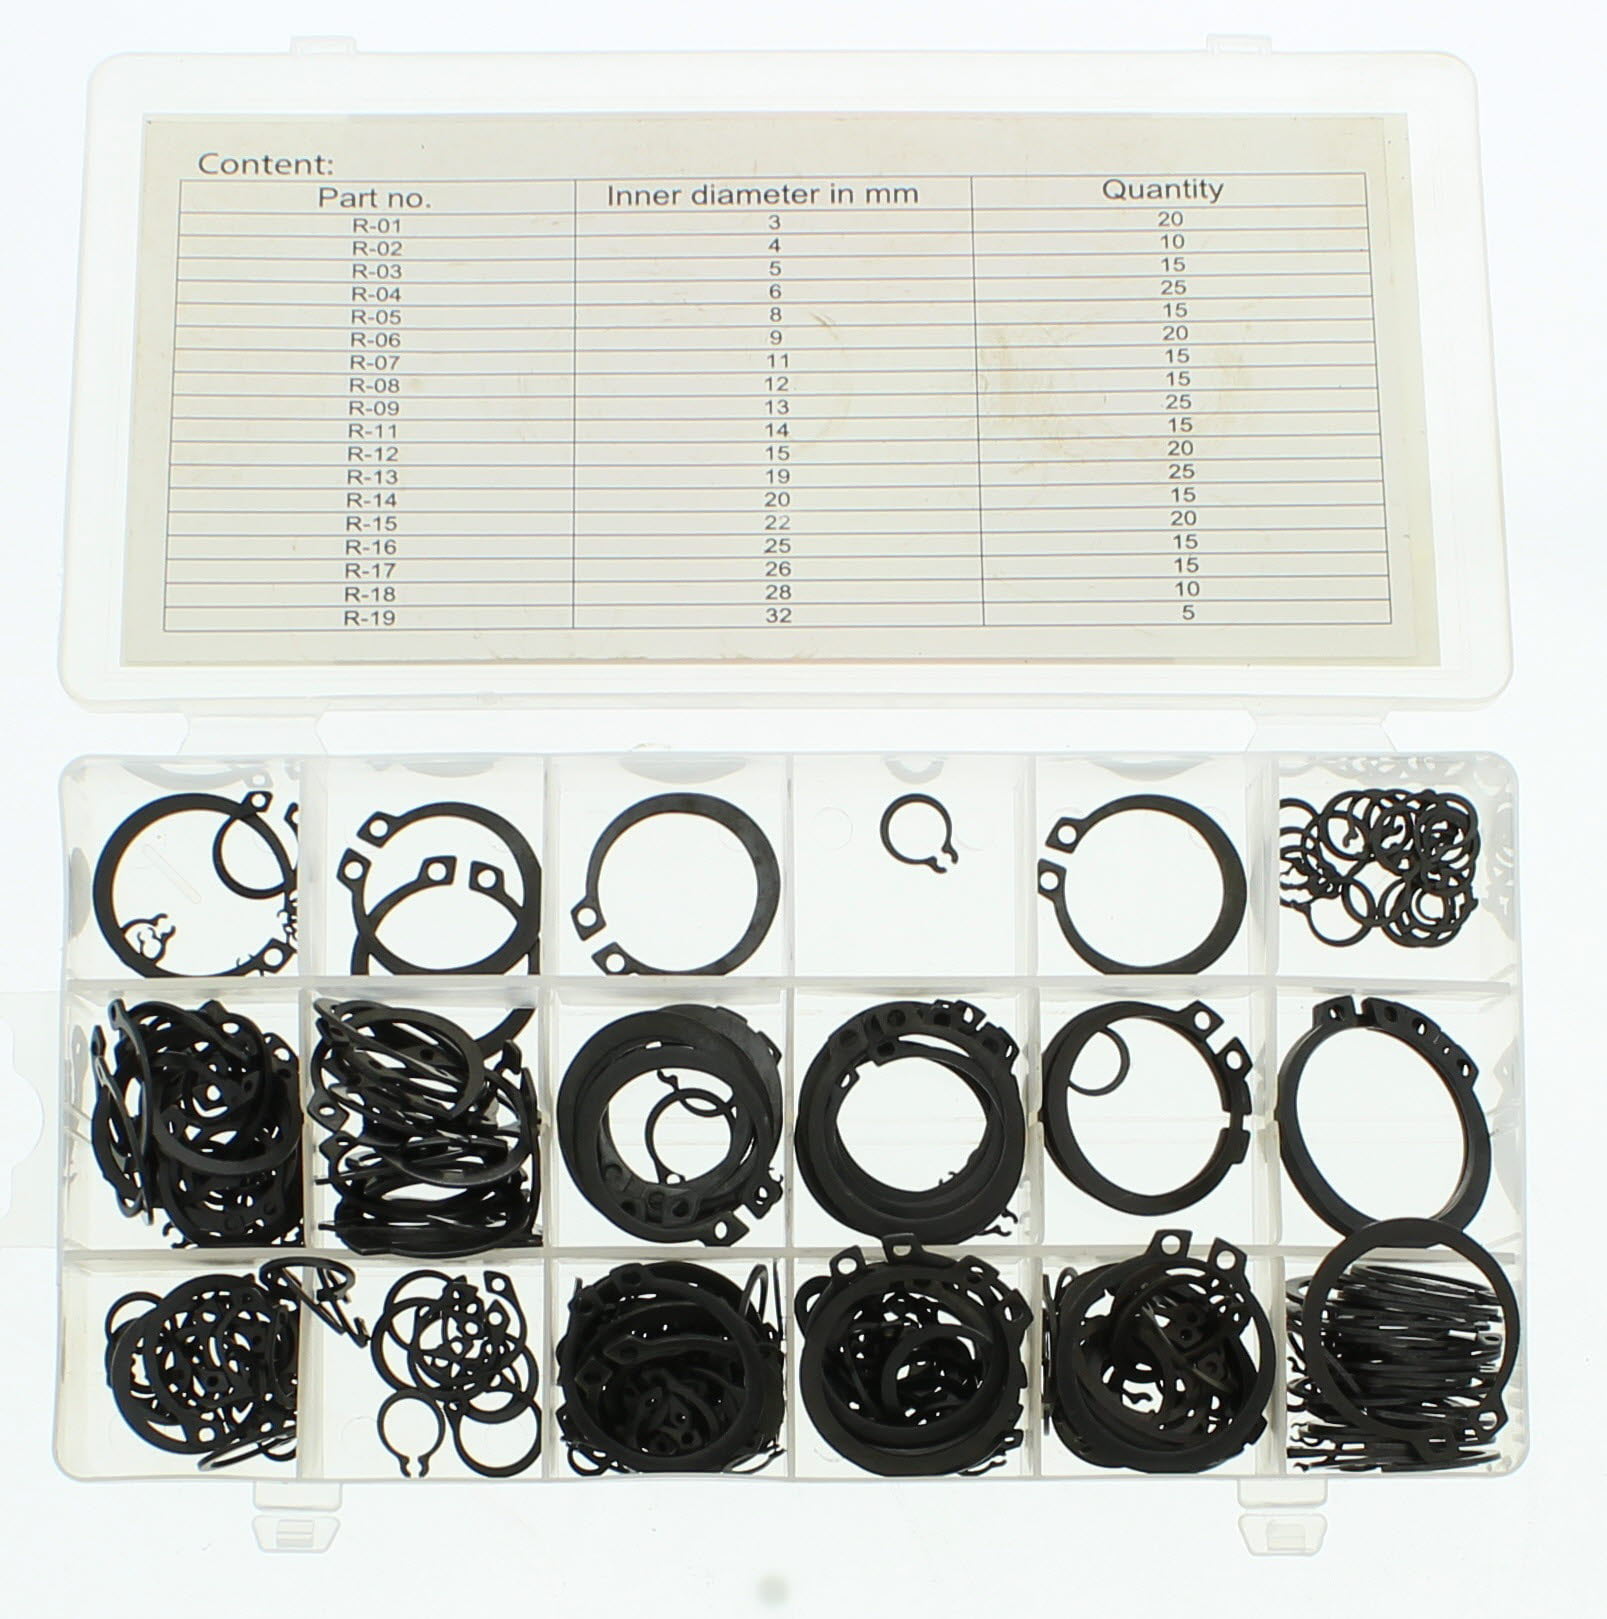 M8-M26 Tyelany C-Clip Snap Circlip Kit 150 Pcs Retaining Ring Assortment 15 Different Sizes 65Mn Steel C-Clip for Hole Internal Opening Ring Circlip Meet Most Needs with a Sturdy Plastic Box